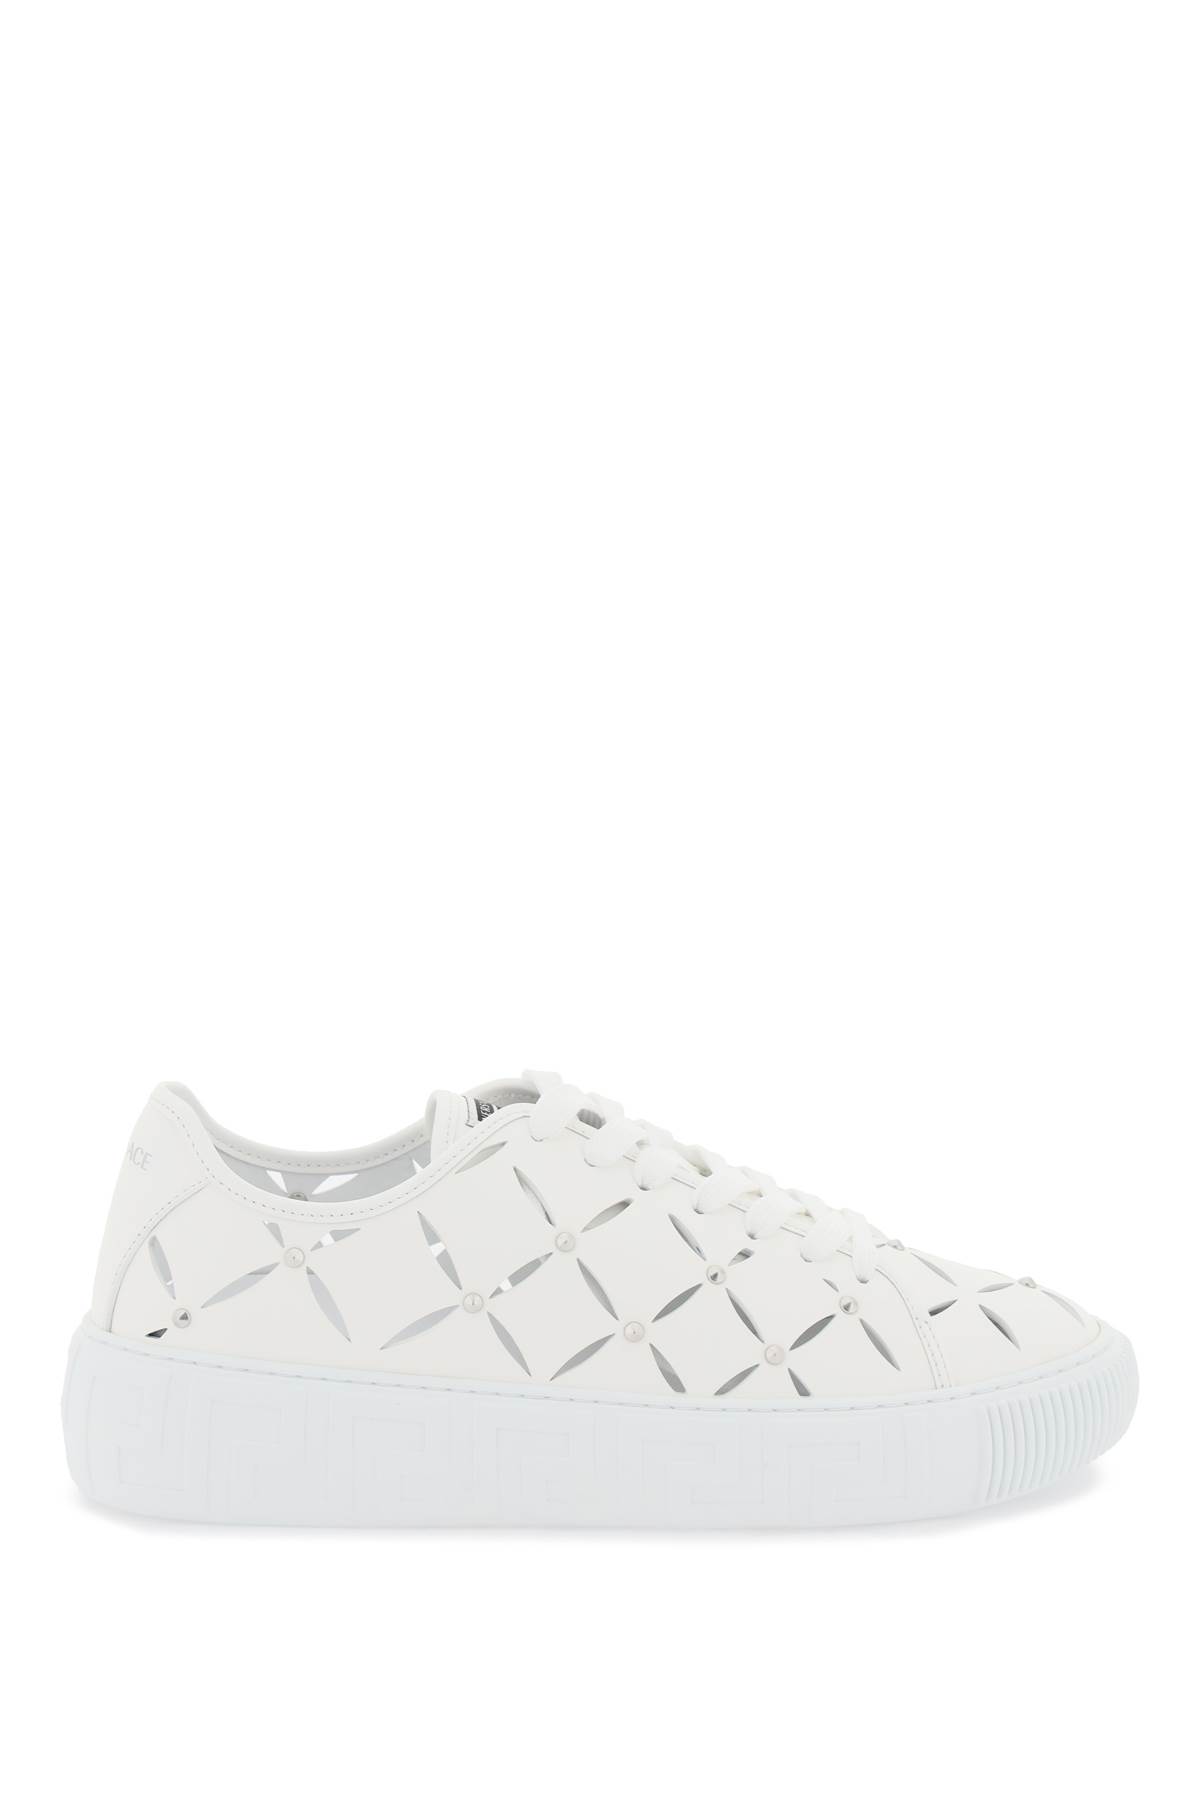 VERSACE GRECA CUT-OUT SNEAKERS